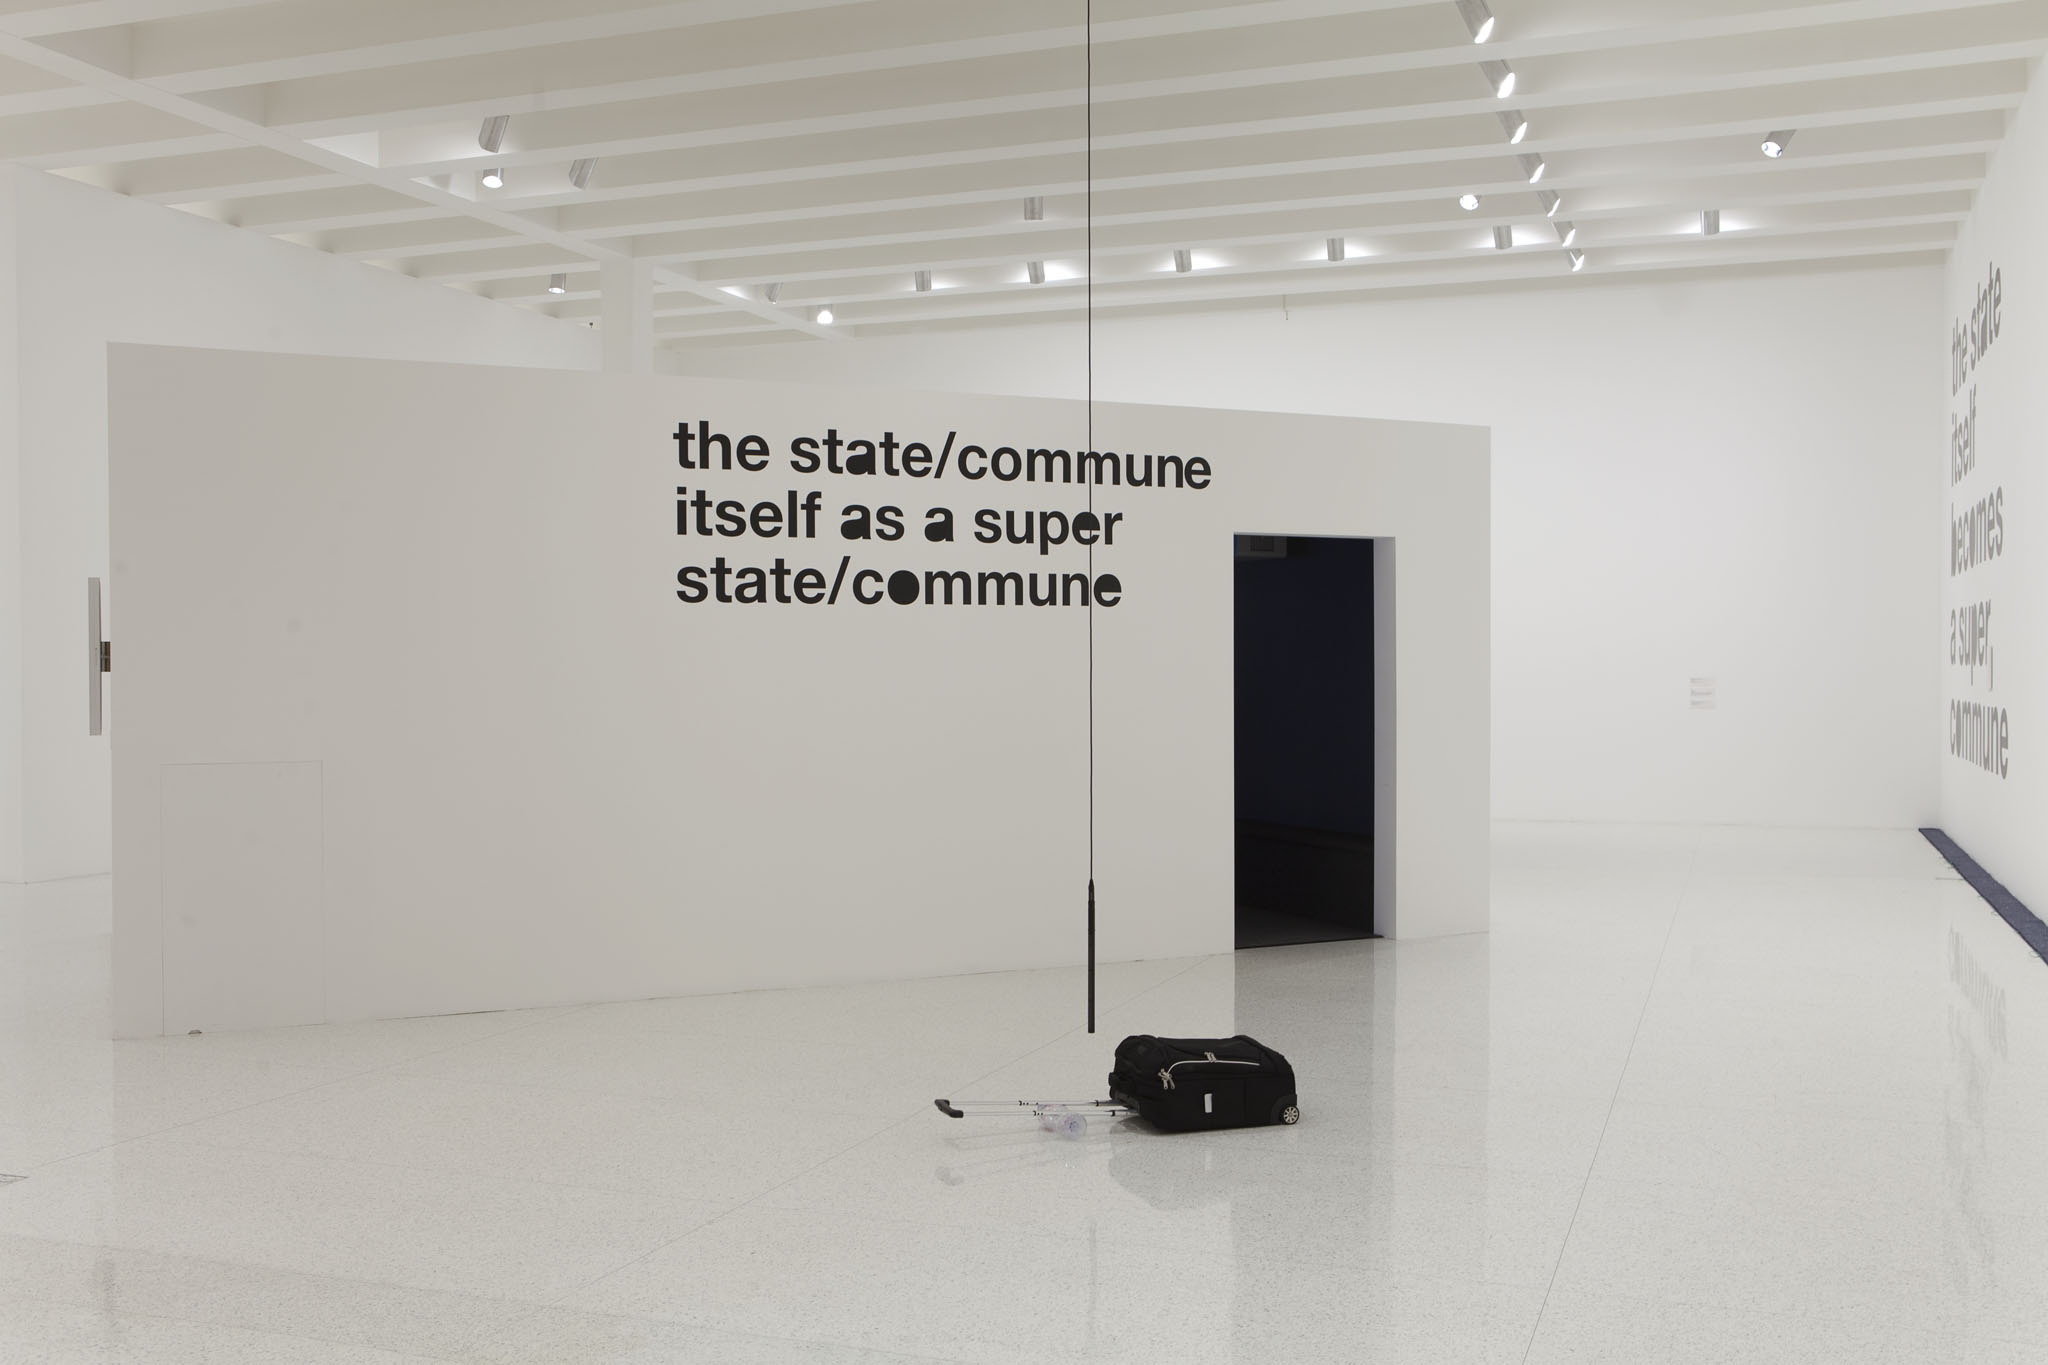 Installation view. Liam Gillick, The state/commune itself becomes a super state/commune. Natasha Sadr De Paso in foreground. Photography by Gene Pithman